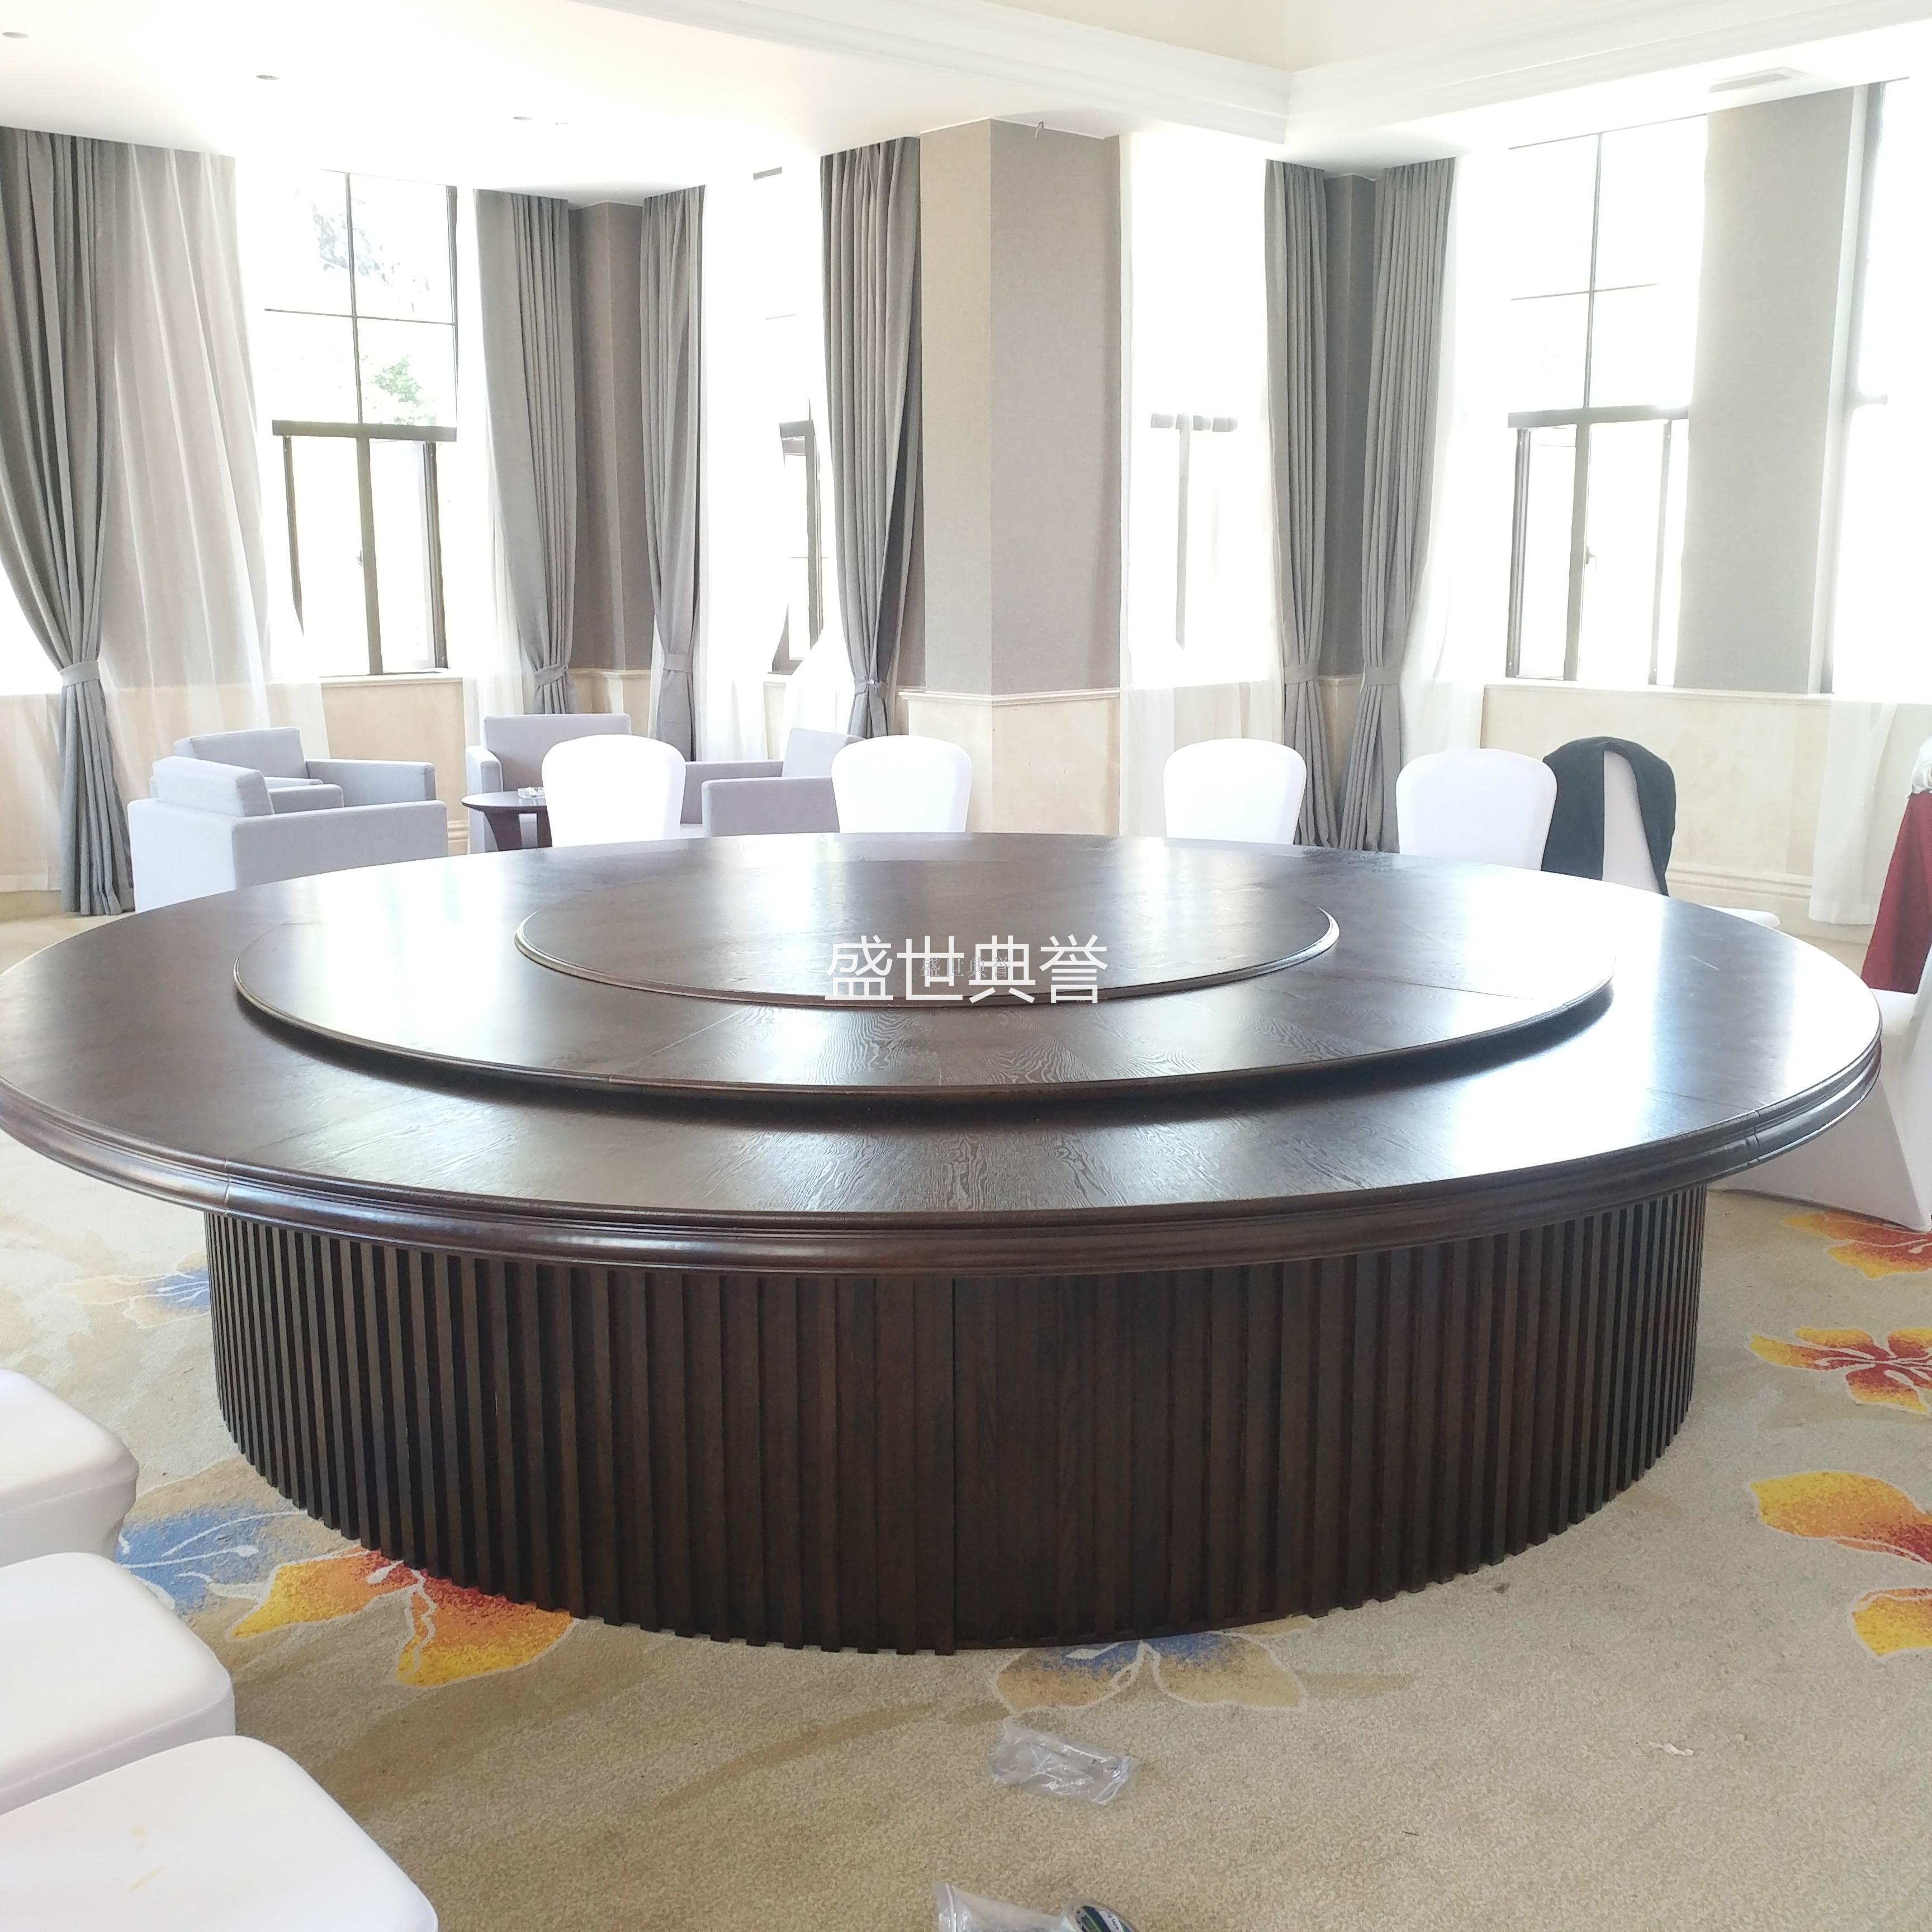 Supply Shanghai Upscale Club New Chinese Style Electric Dining Table Restaurant Grand Package Solid Wood Big Round Table